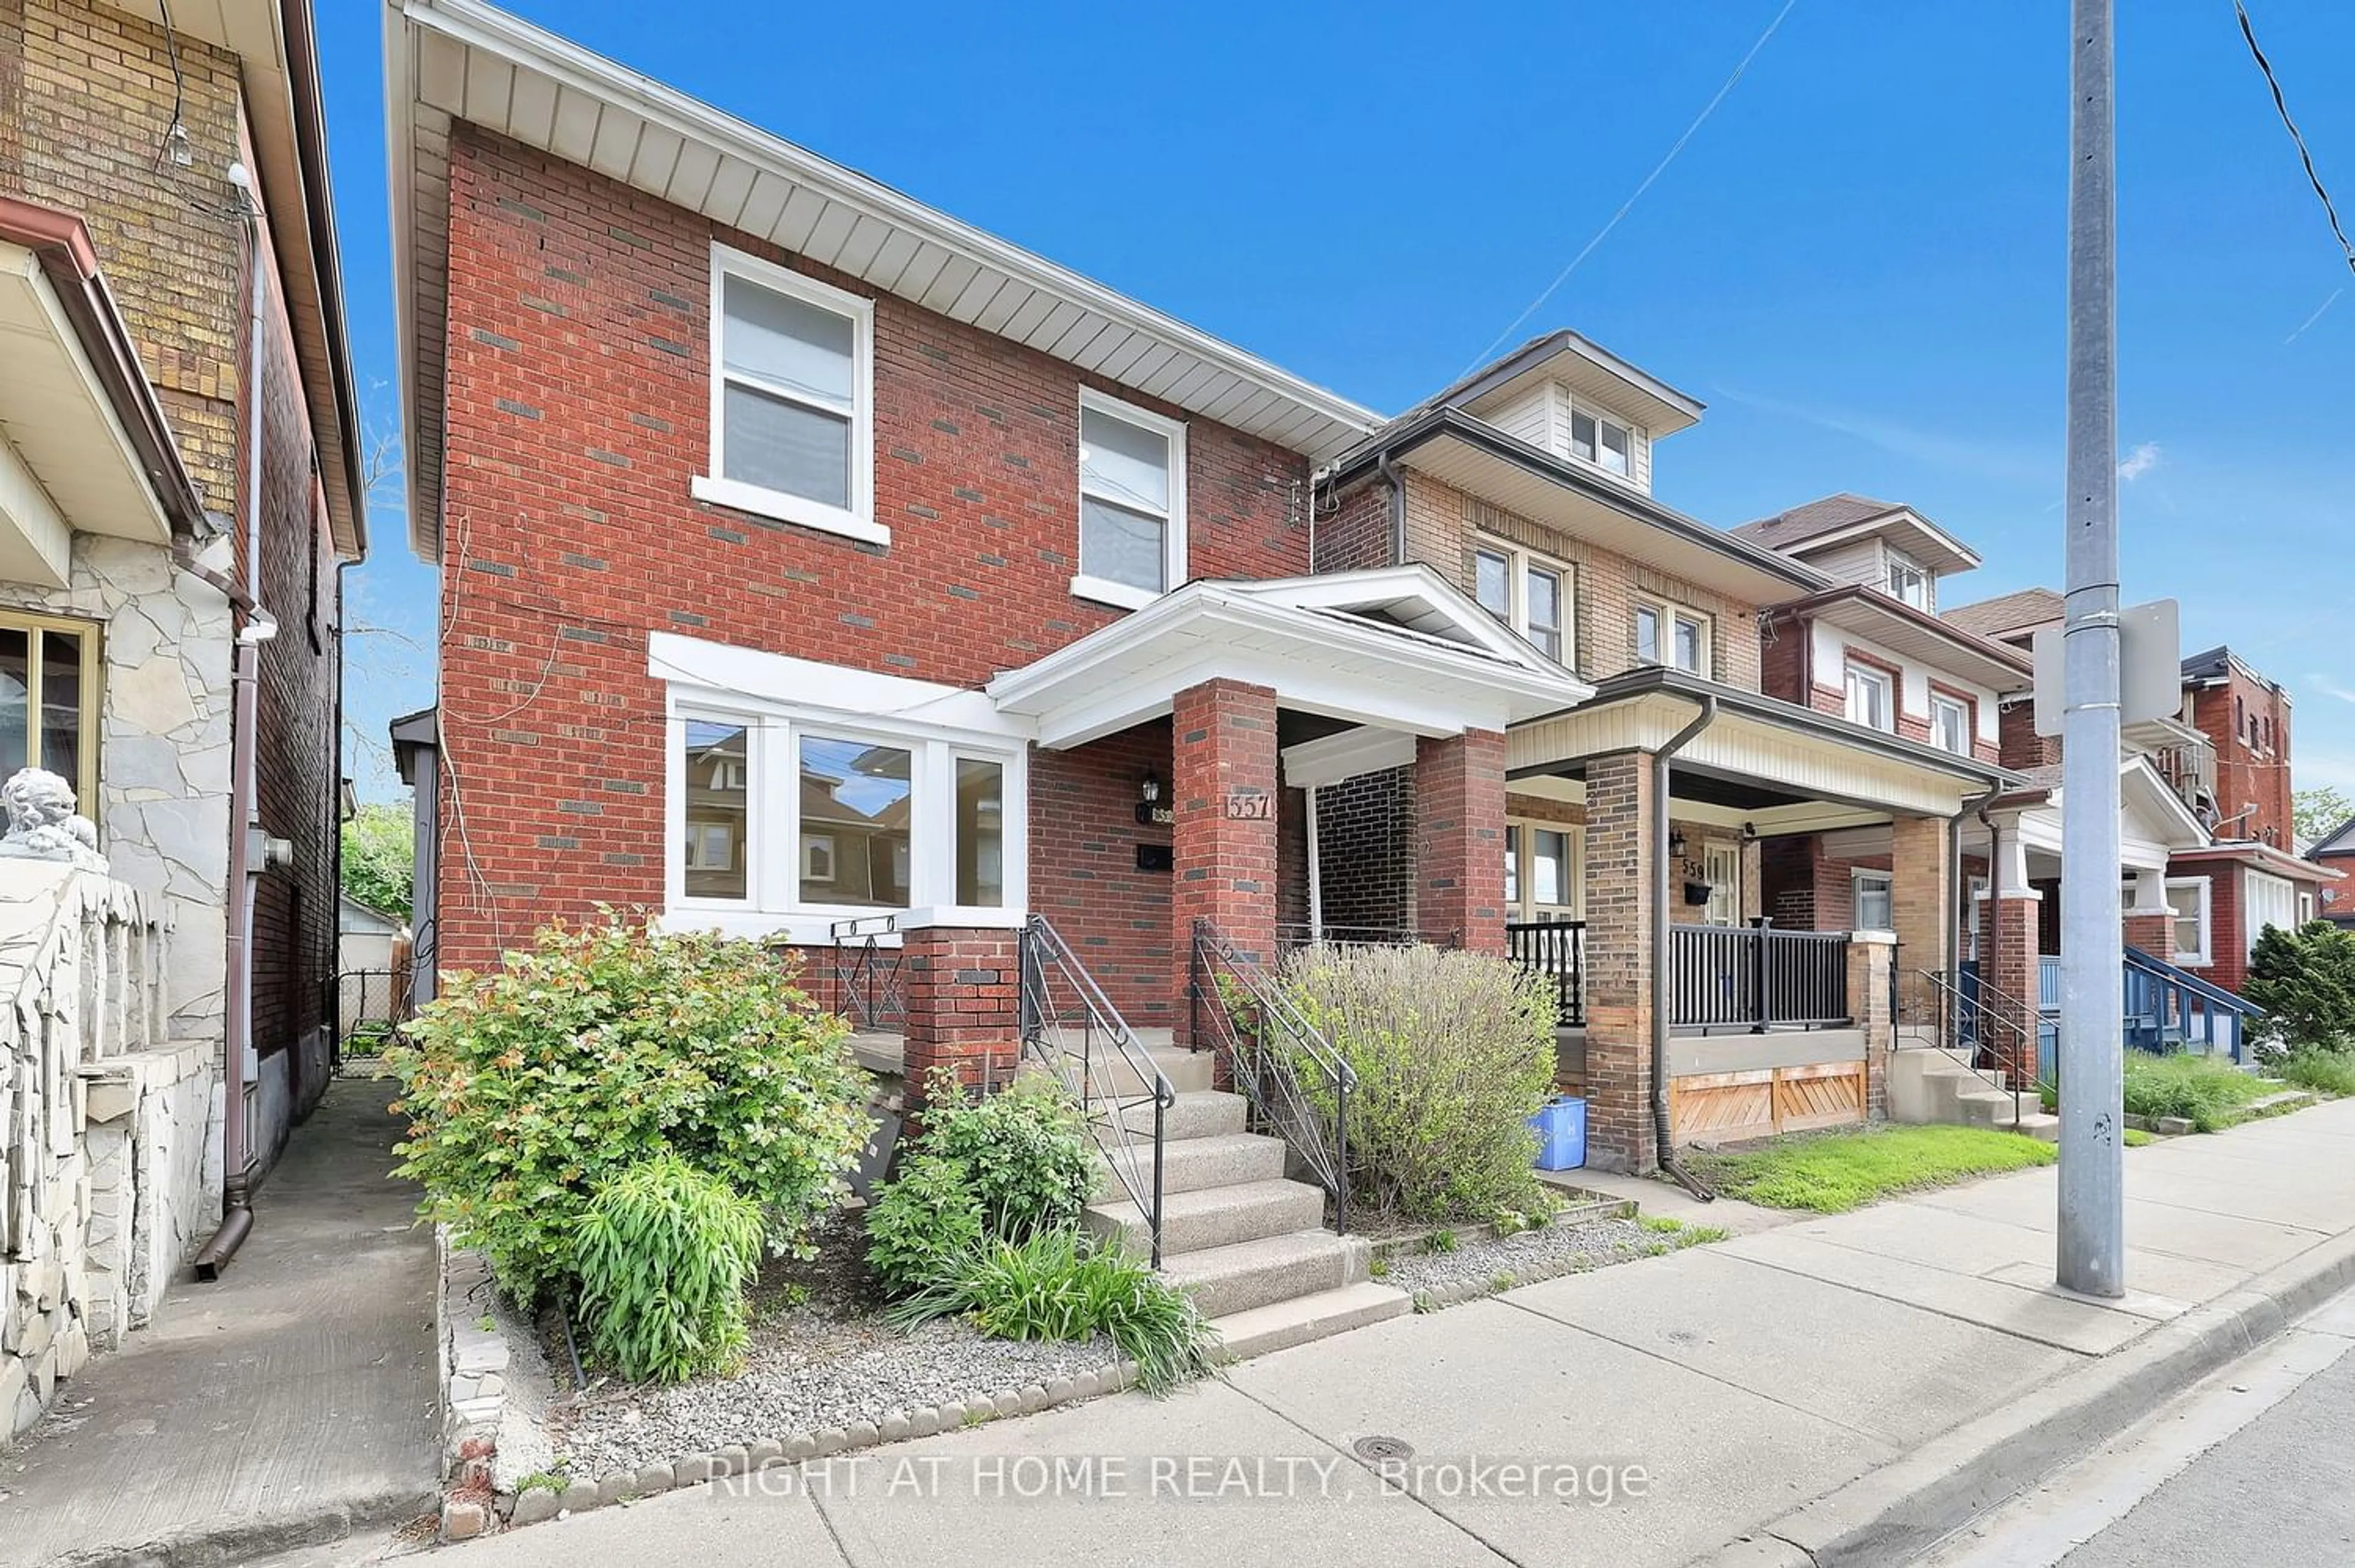 Home with brick exterior material for 557 Cannon St, Hamilton Ontario L8L 2G2